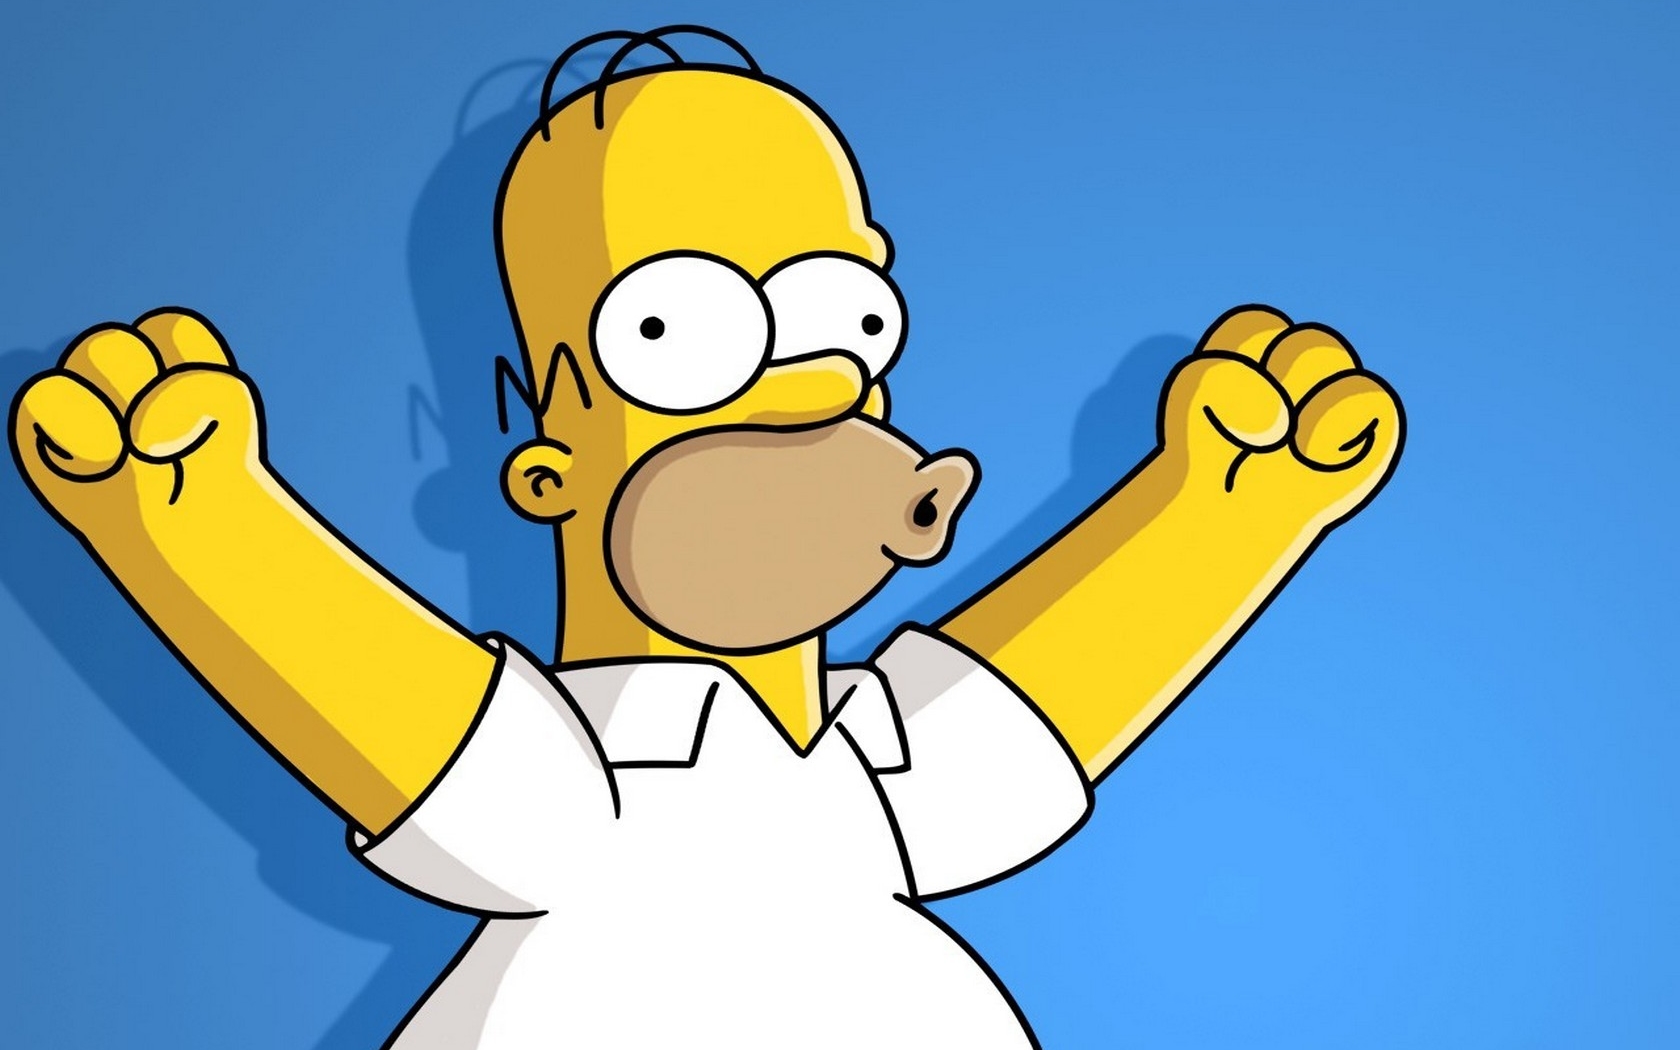 Homer And Simpsons Image - Homer Simpson - HD Wallpaper 